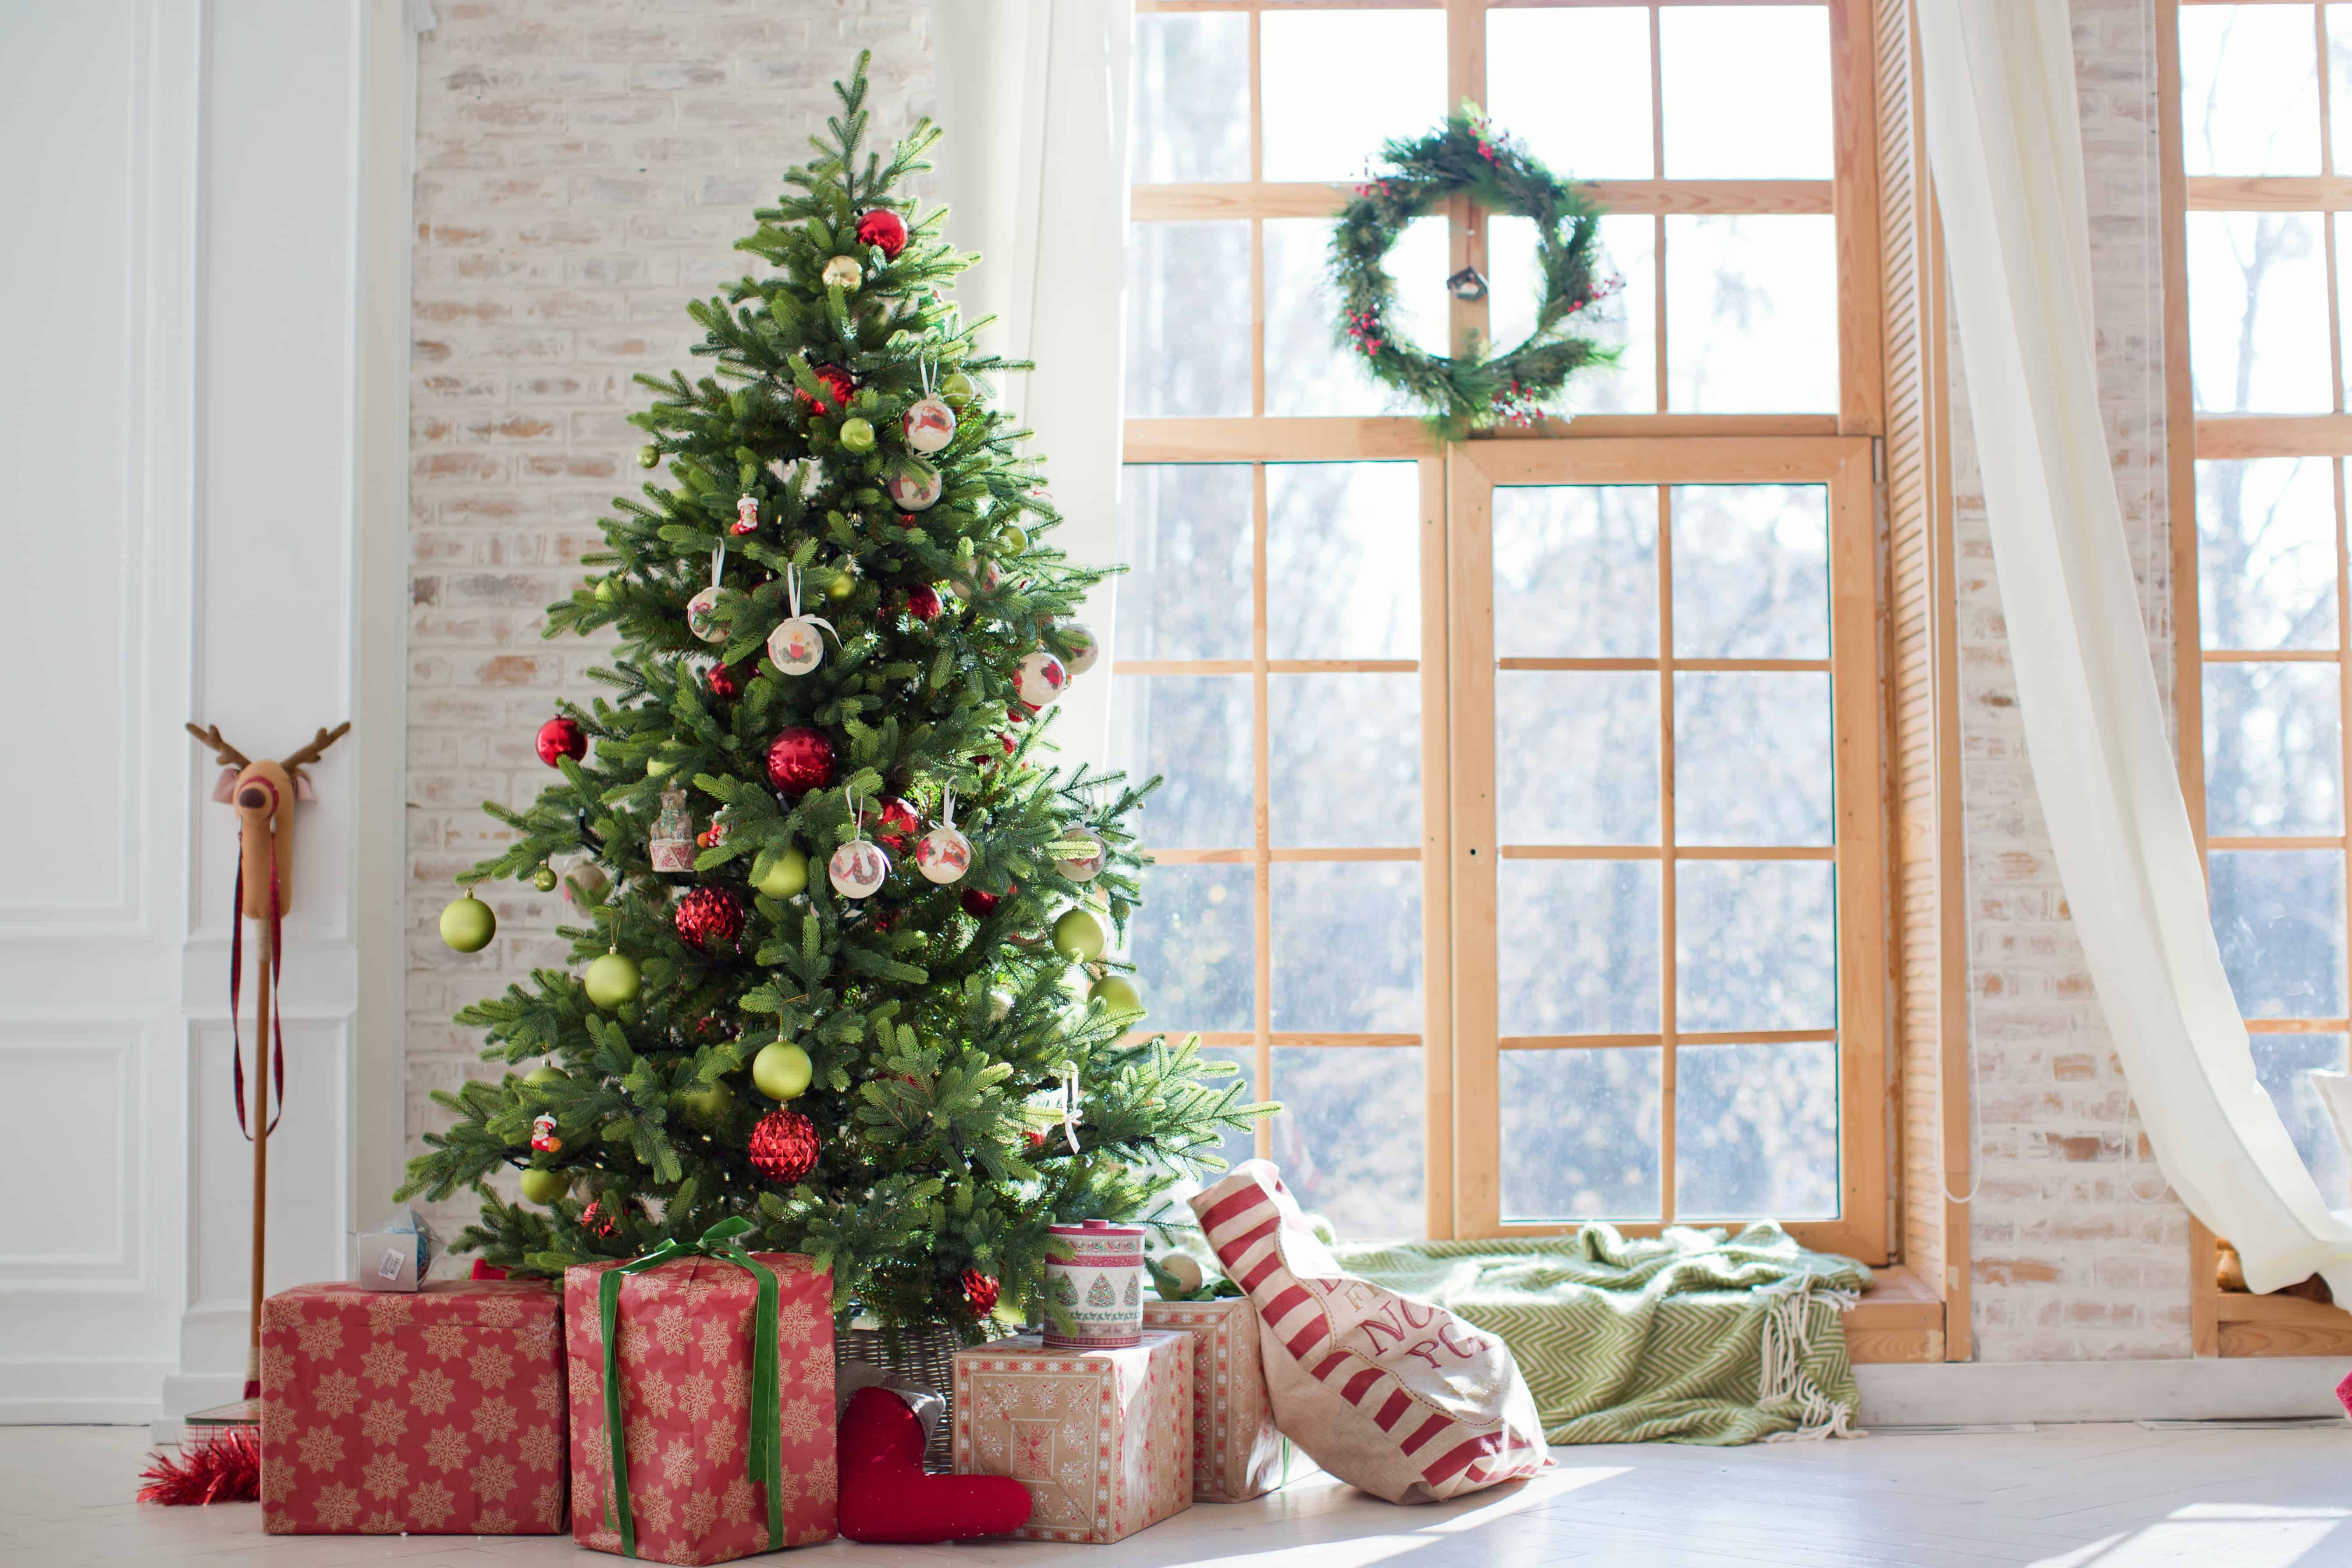 11 Question About Christmas Trees (Answered)